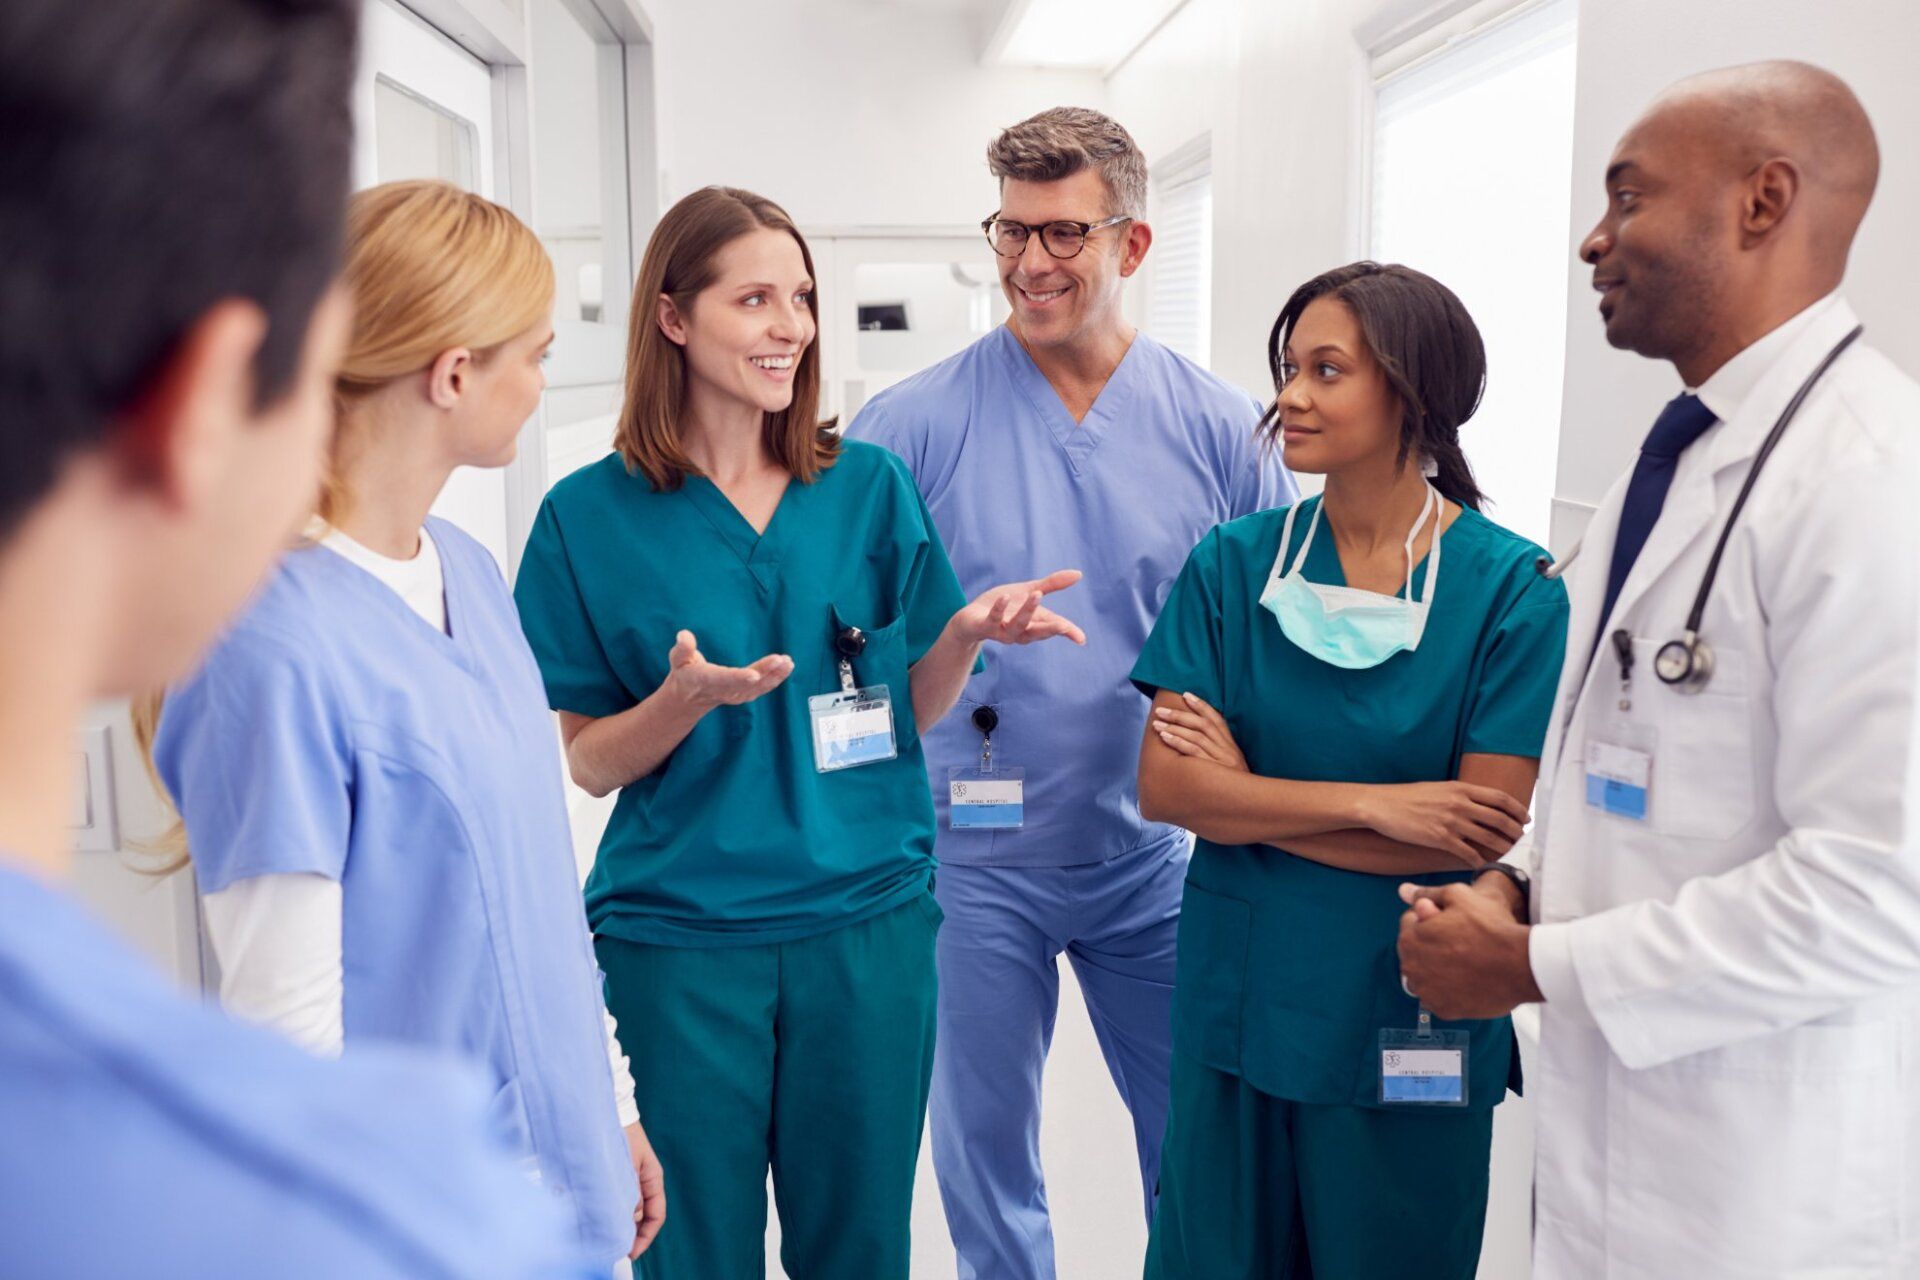 A group of doctors and nurses are standing in a hospital hallway talking to each other.